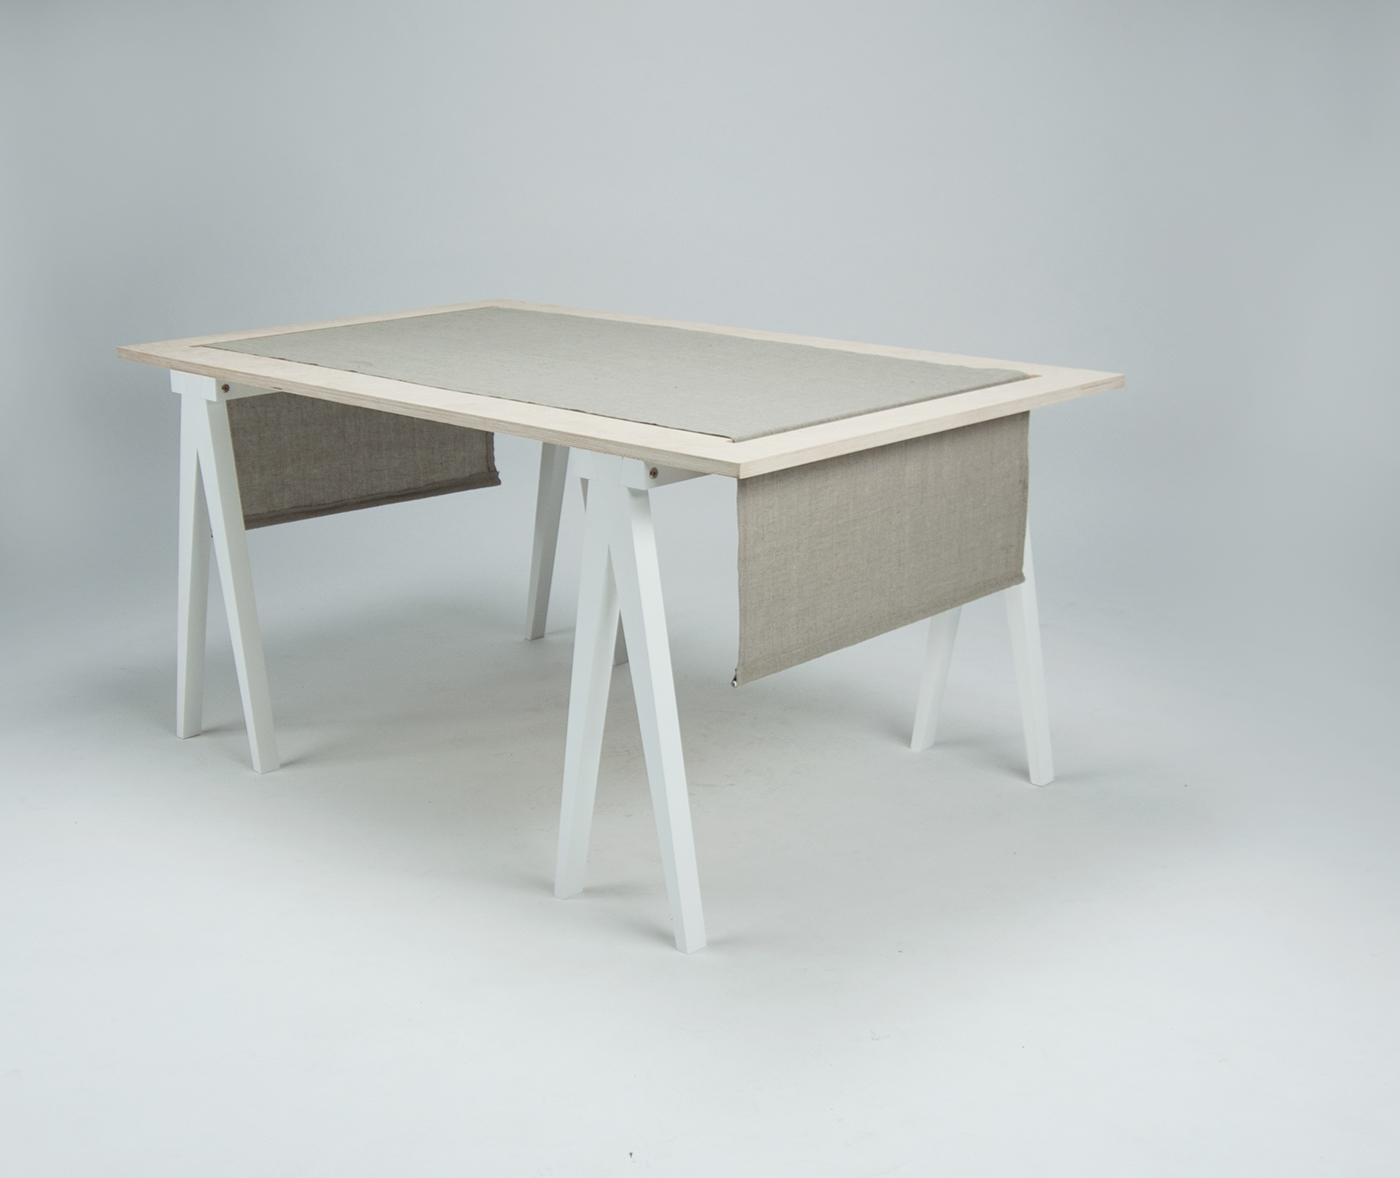 table furniture swallow design product cnc cutting decore linen cloth fabric steel Equal comfortable transportation